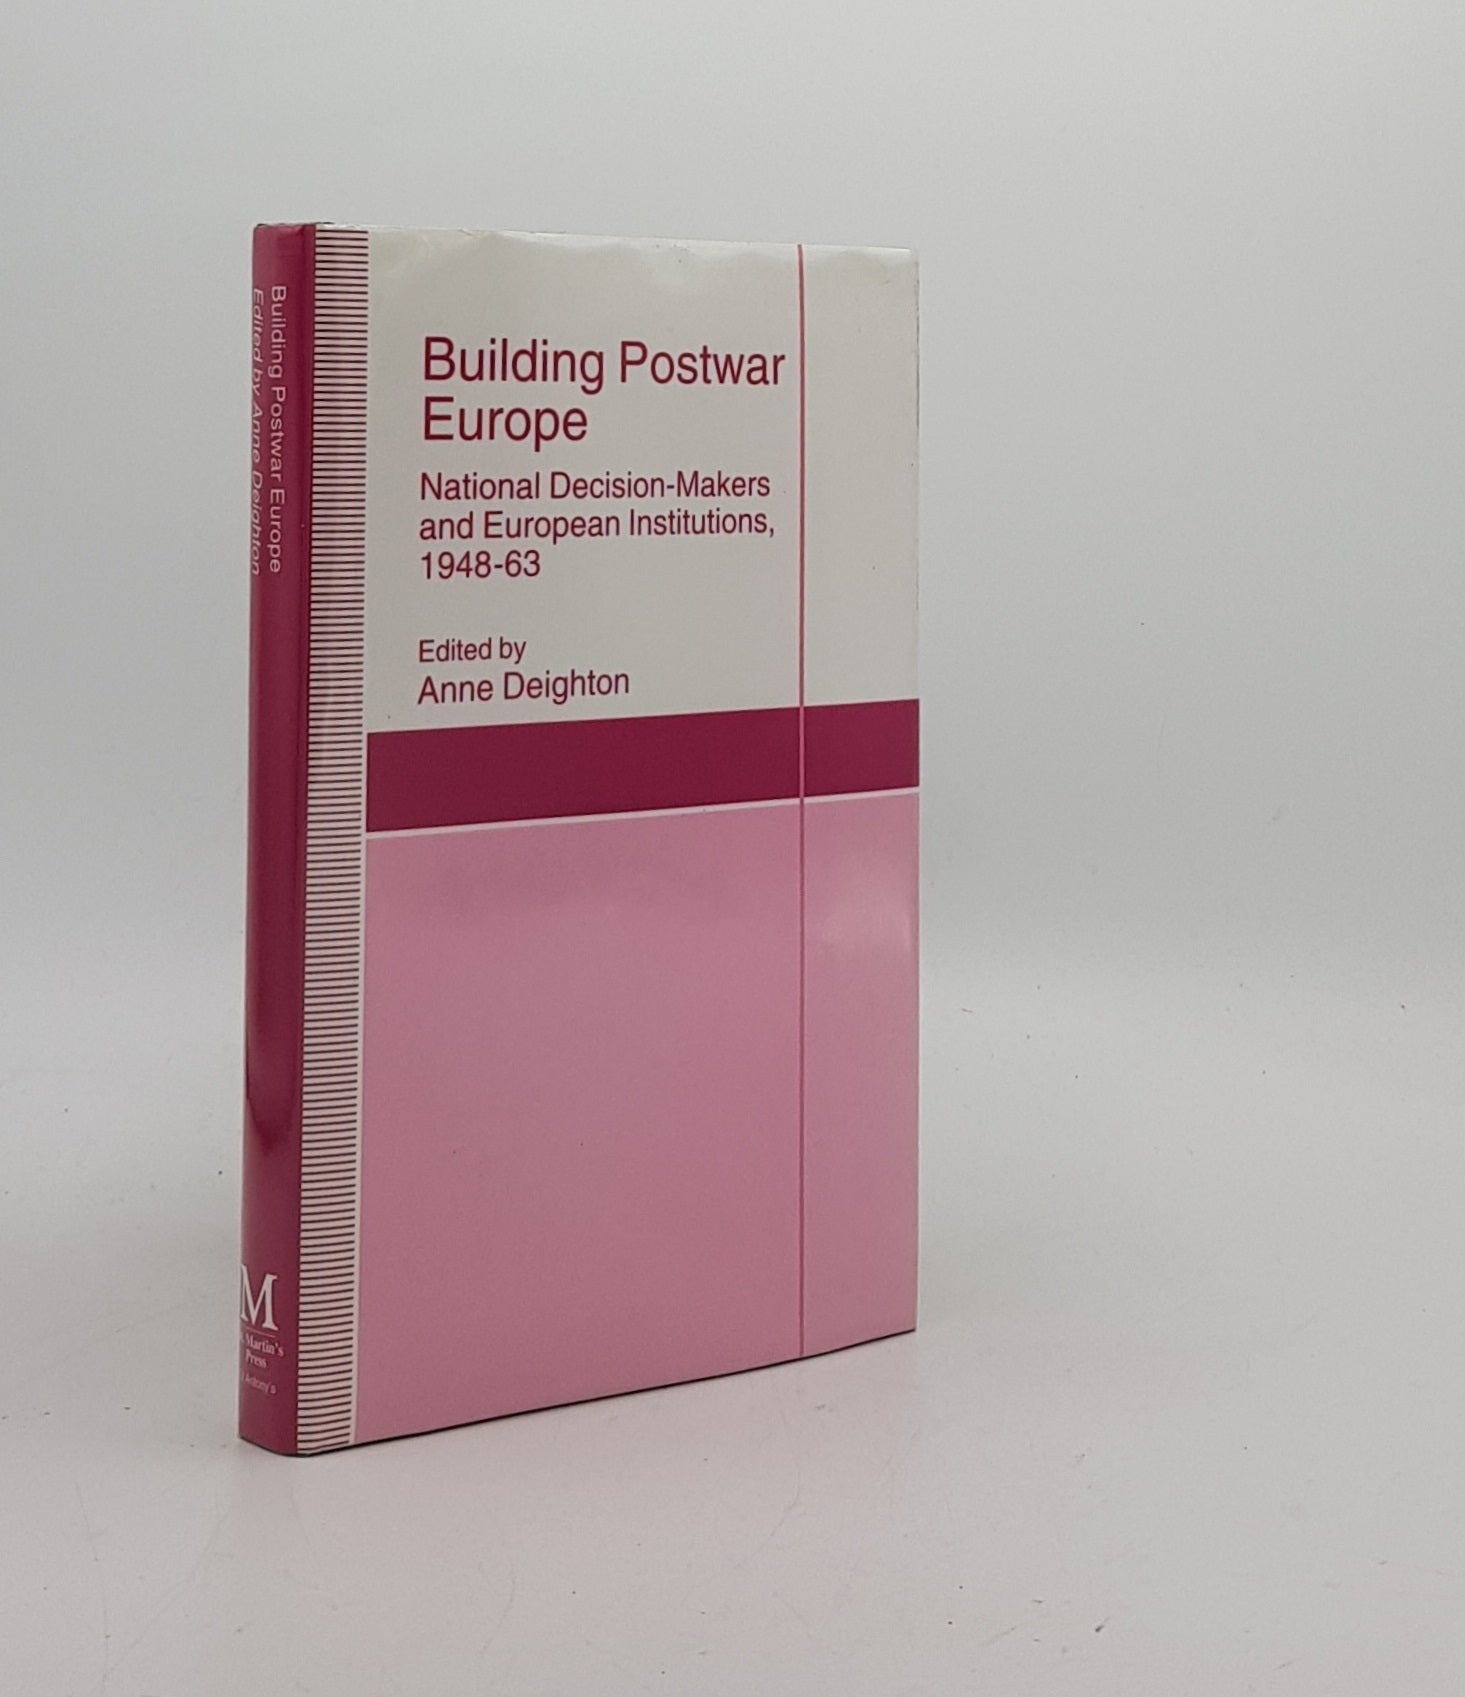 DEIGHTON Anne - Building Postwar Europe National Decision-Makers and European Institutions 1948-63